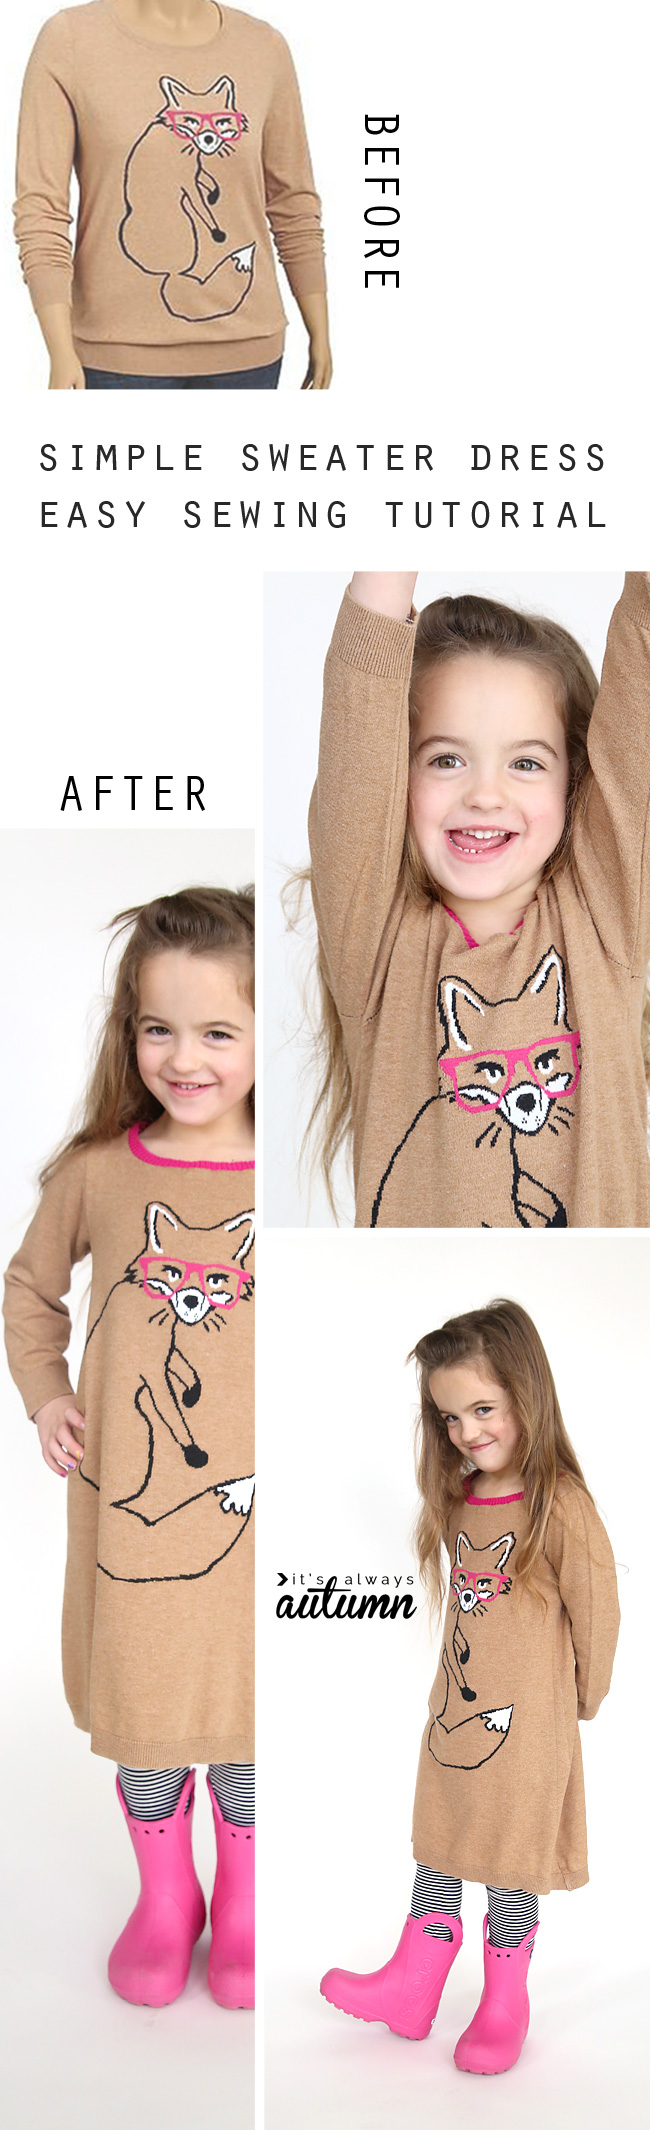 Before photo is a women\'s sweater, after photo is little girl posing with a dress made from that sweater